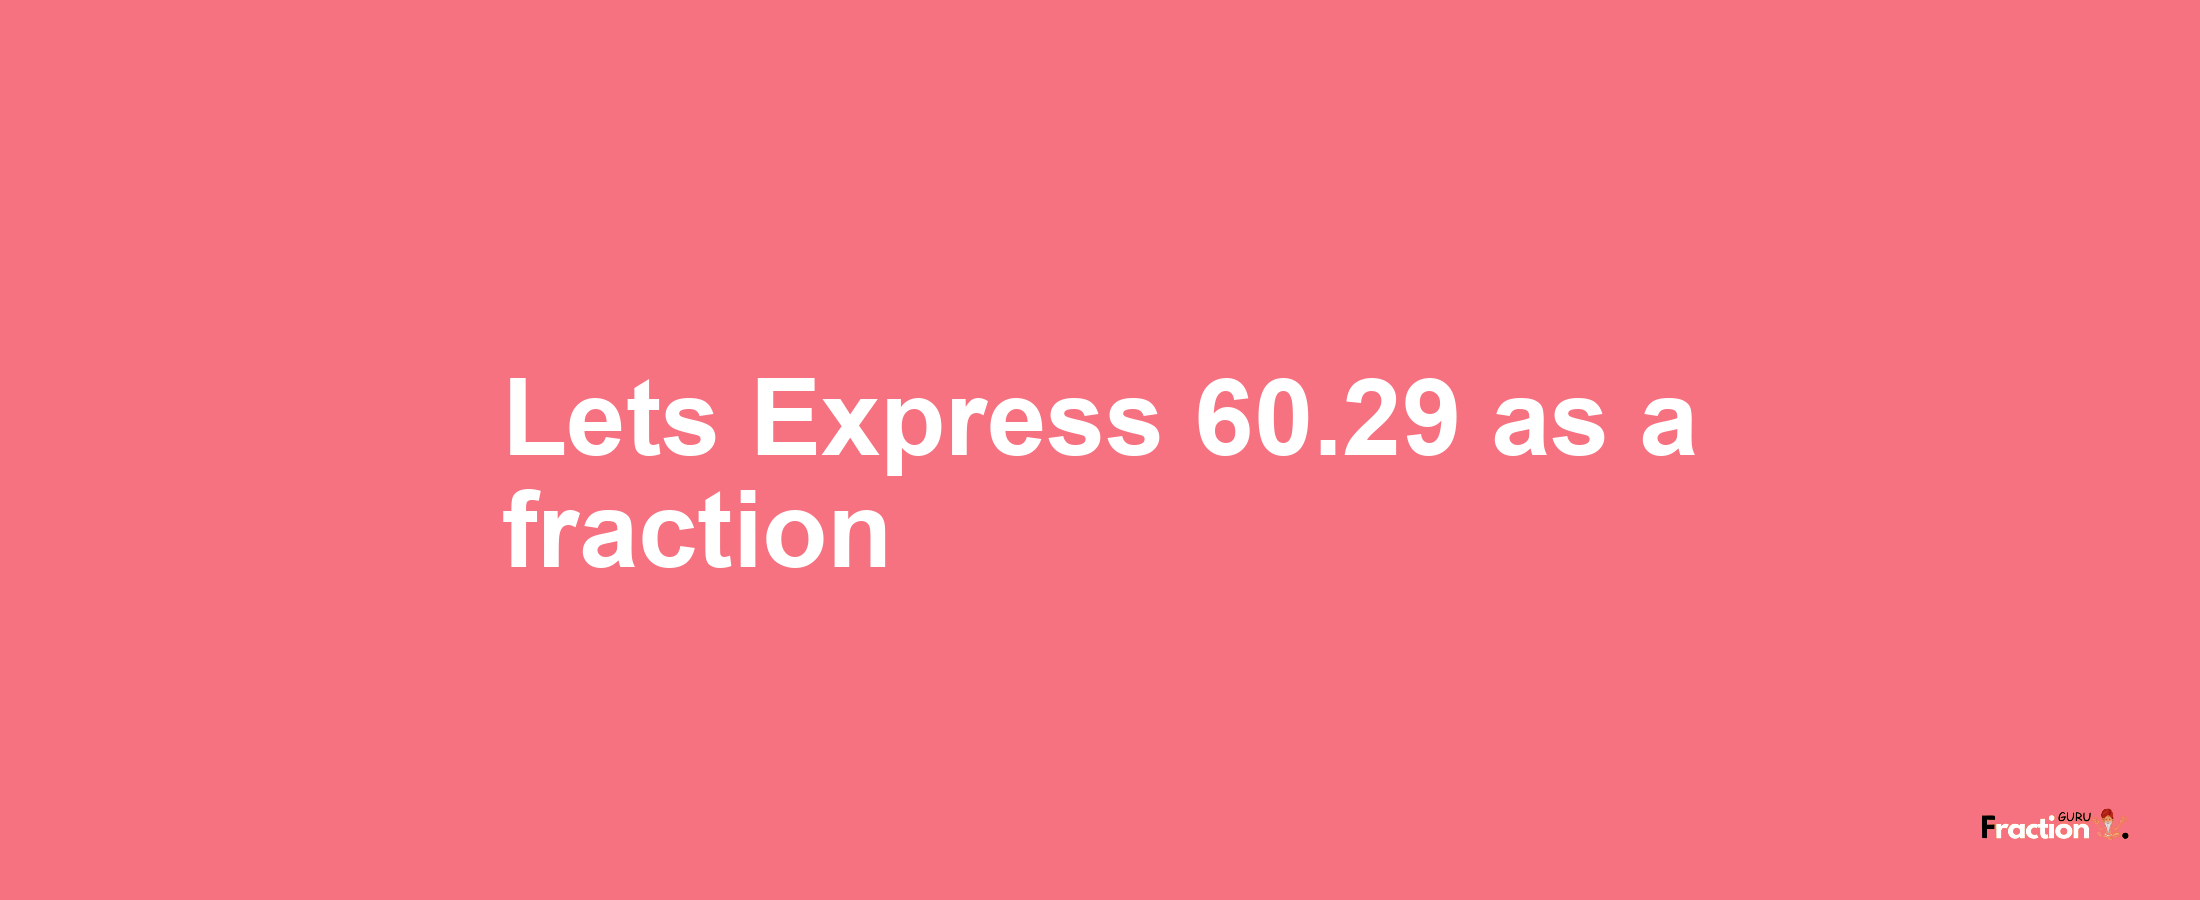 Lets Express 60.29 as afraction